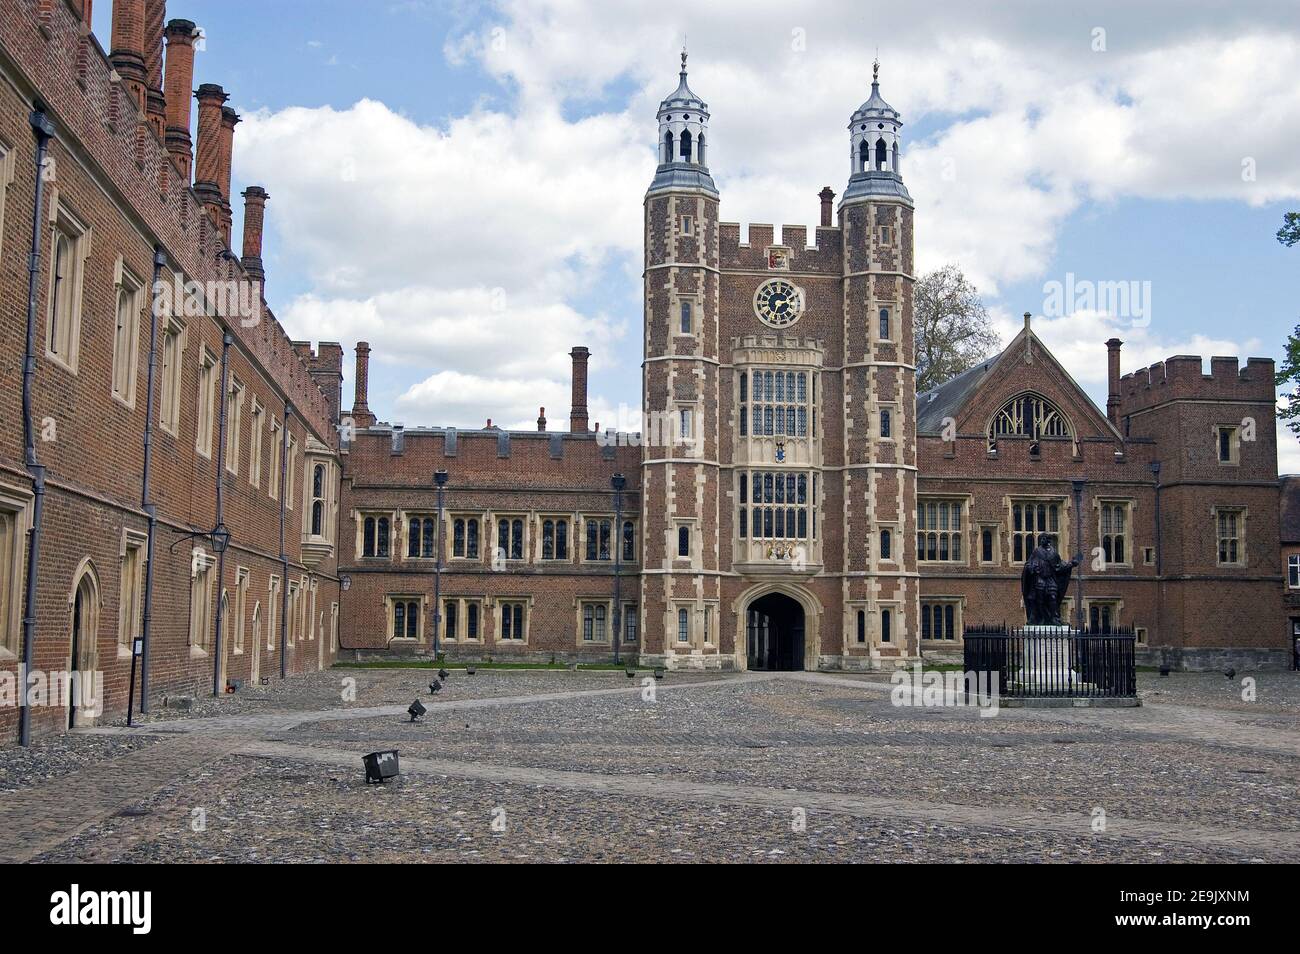 The imposing quadrangle at the historic Eton College, Windsor, Berkshire. Lupton's Tower in the centre dates from Tudor times. Stock Photo